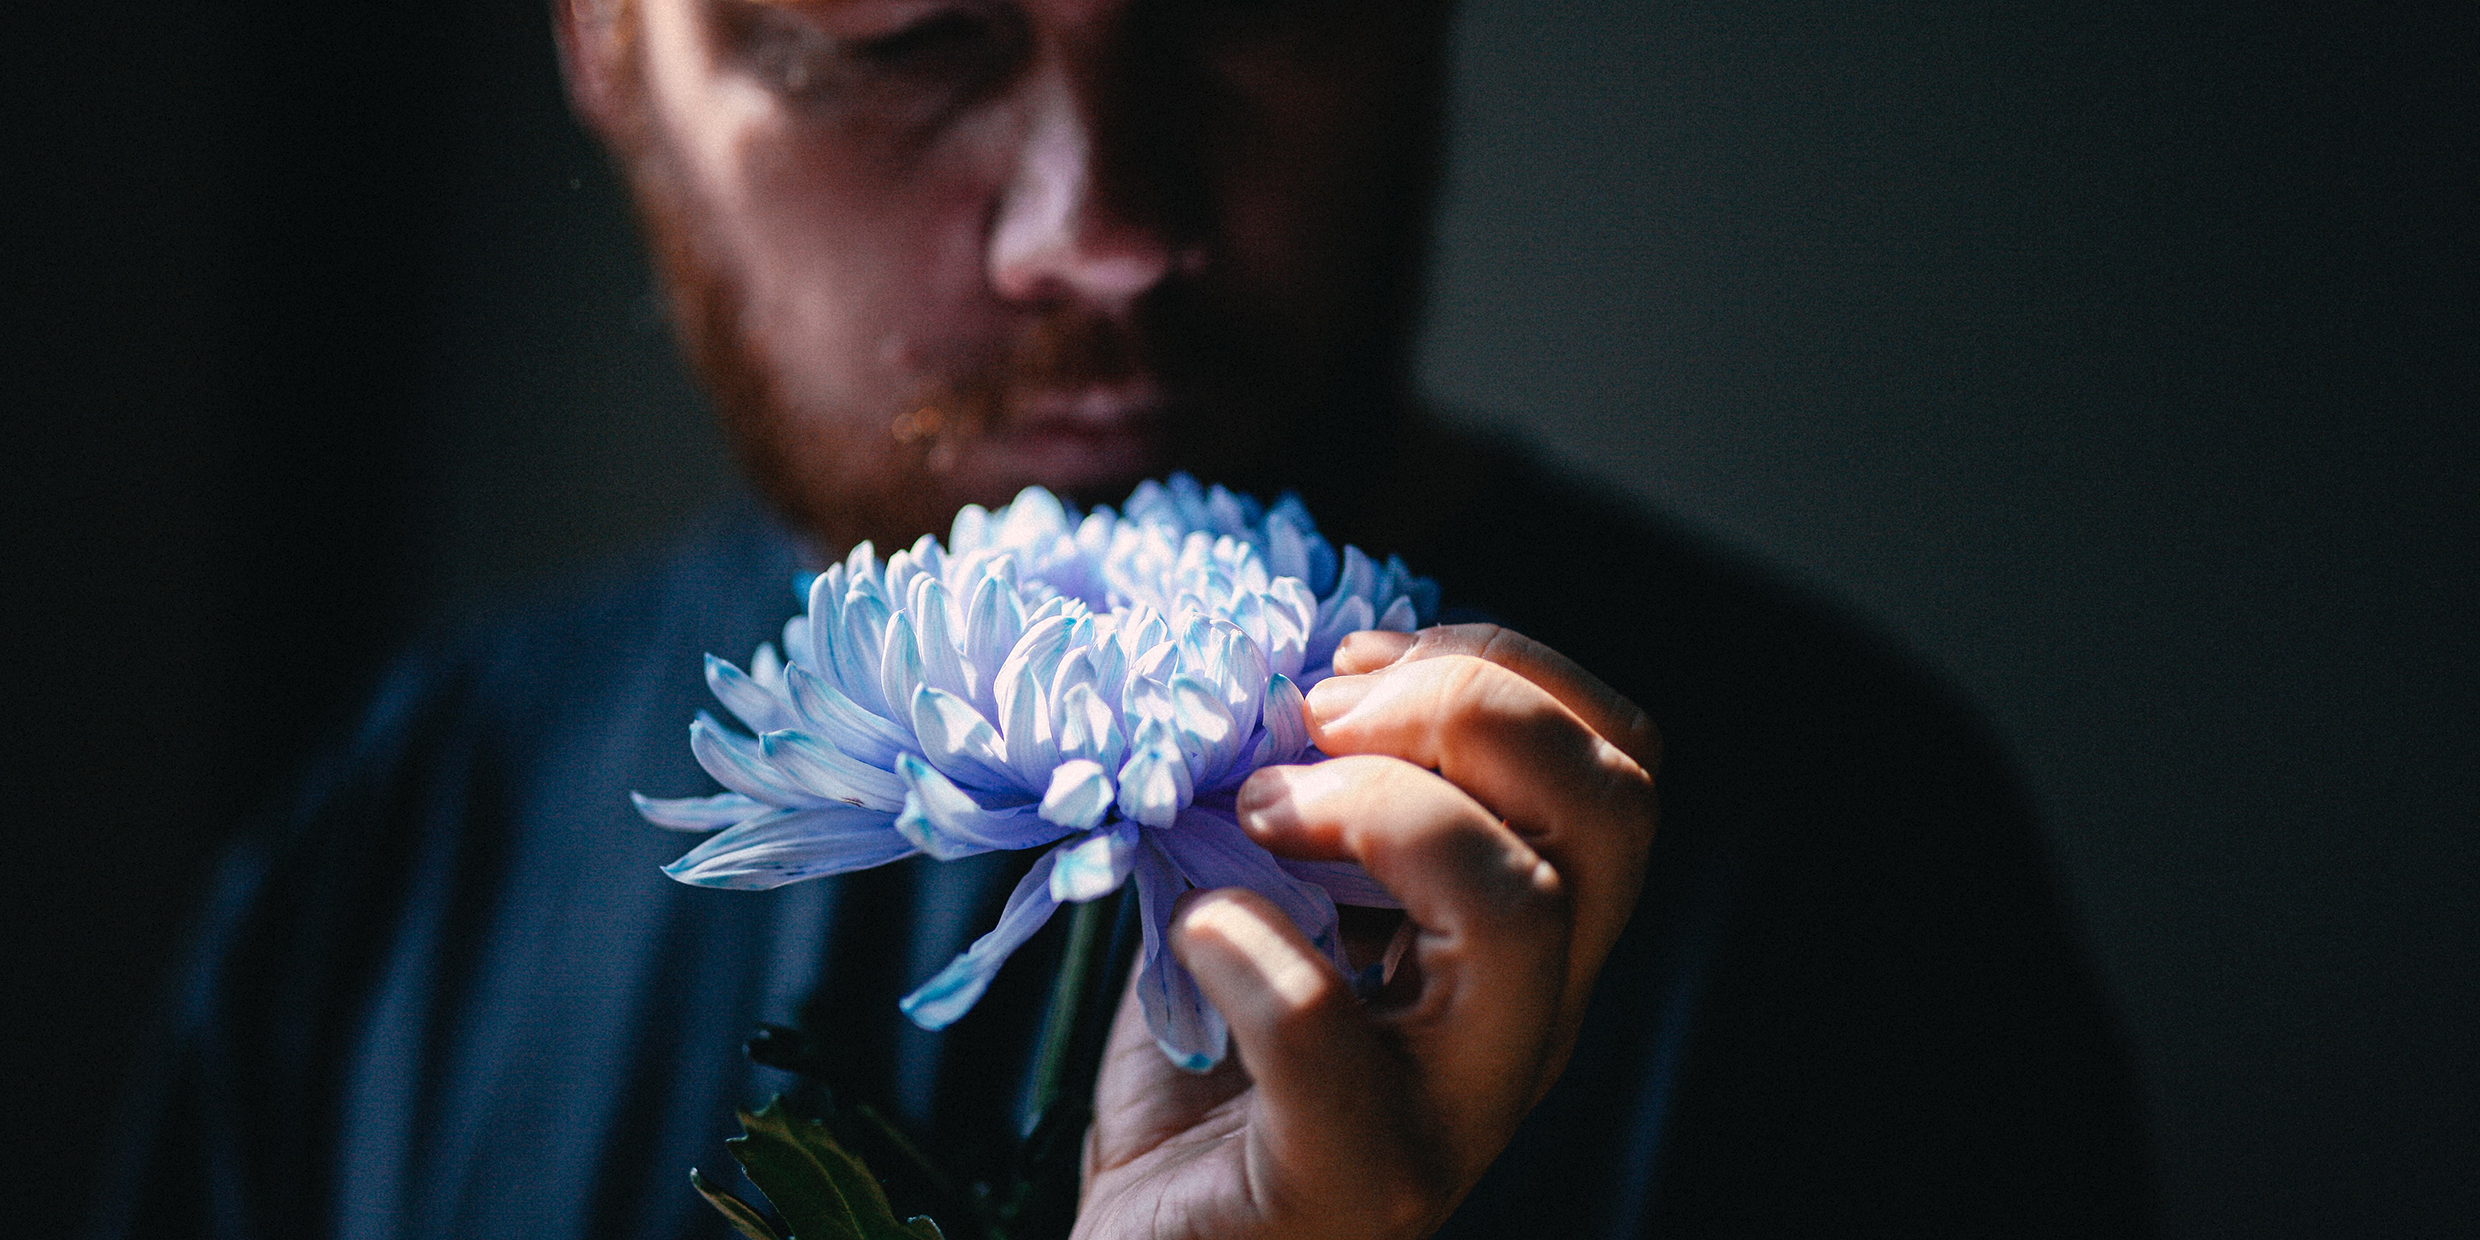 Image of a man smelling a flower